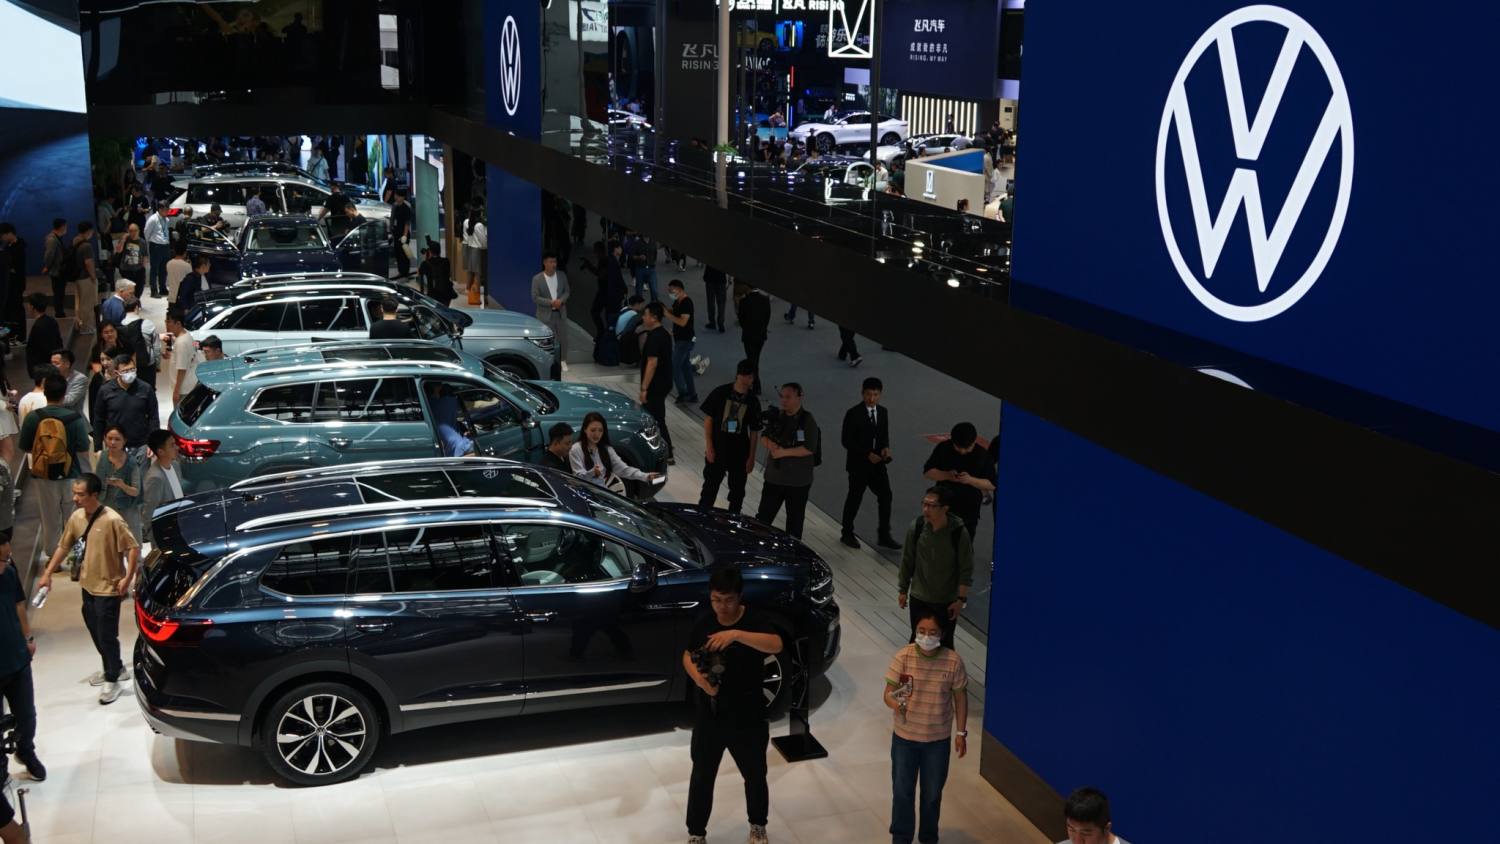 Volkswagen Partners with Xpeng to Accelerate EV Development in China